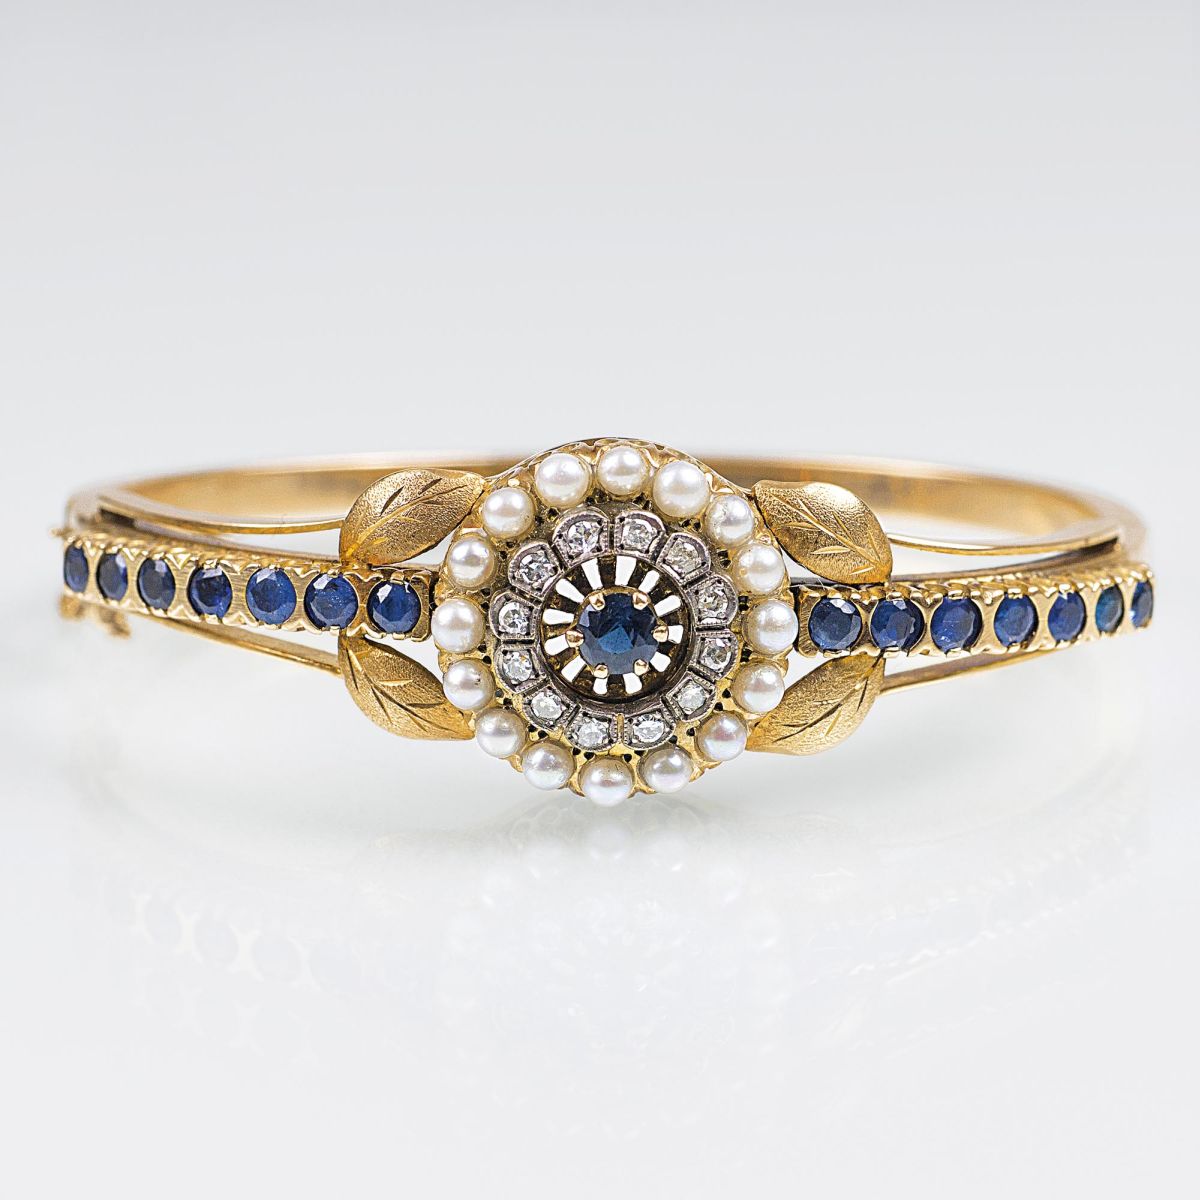 An Antique Gold Bangle Bracelet with Sapphires and Pearls